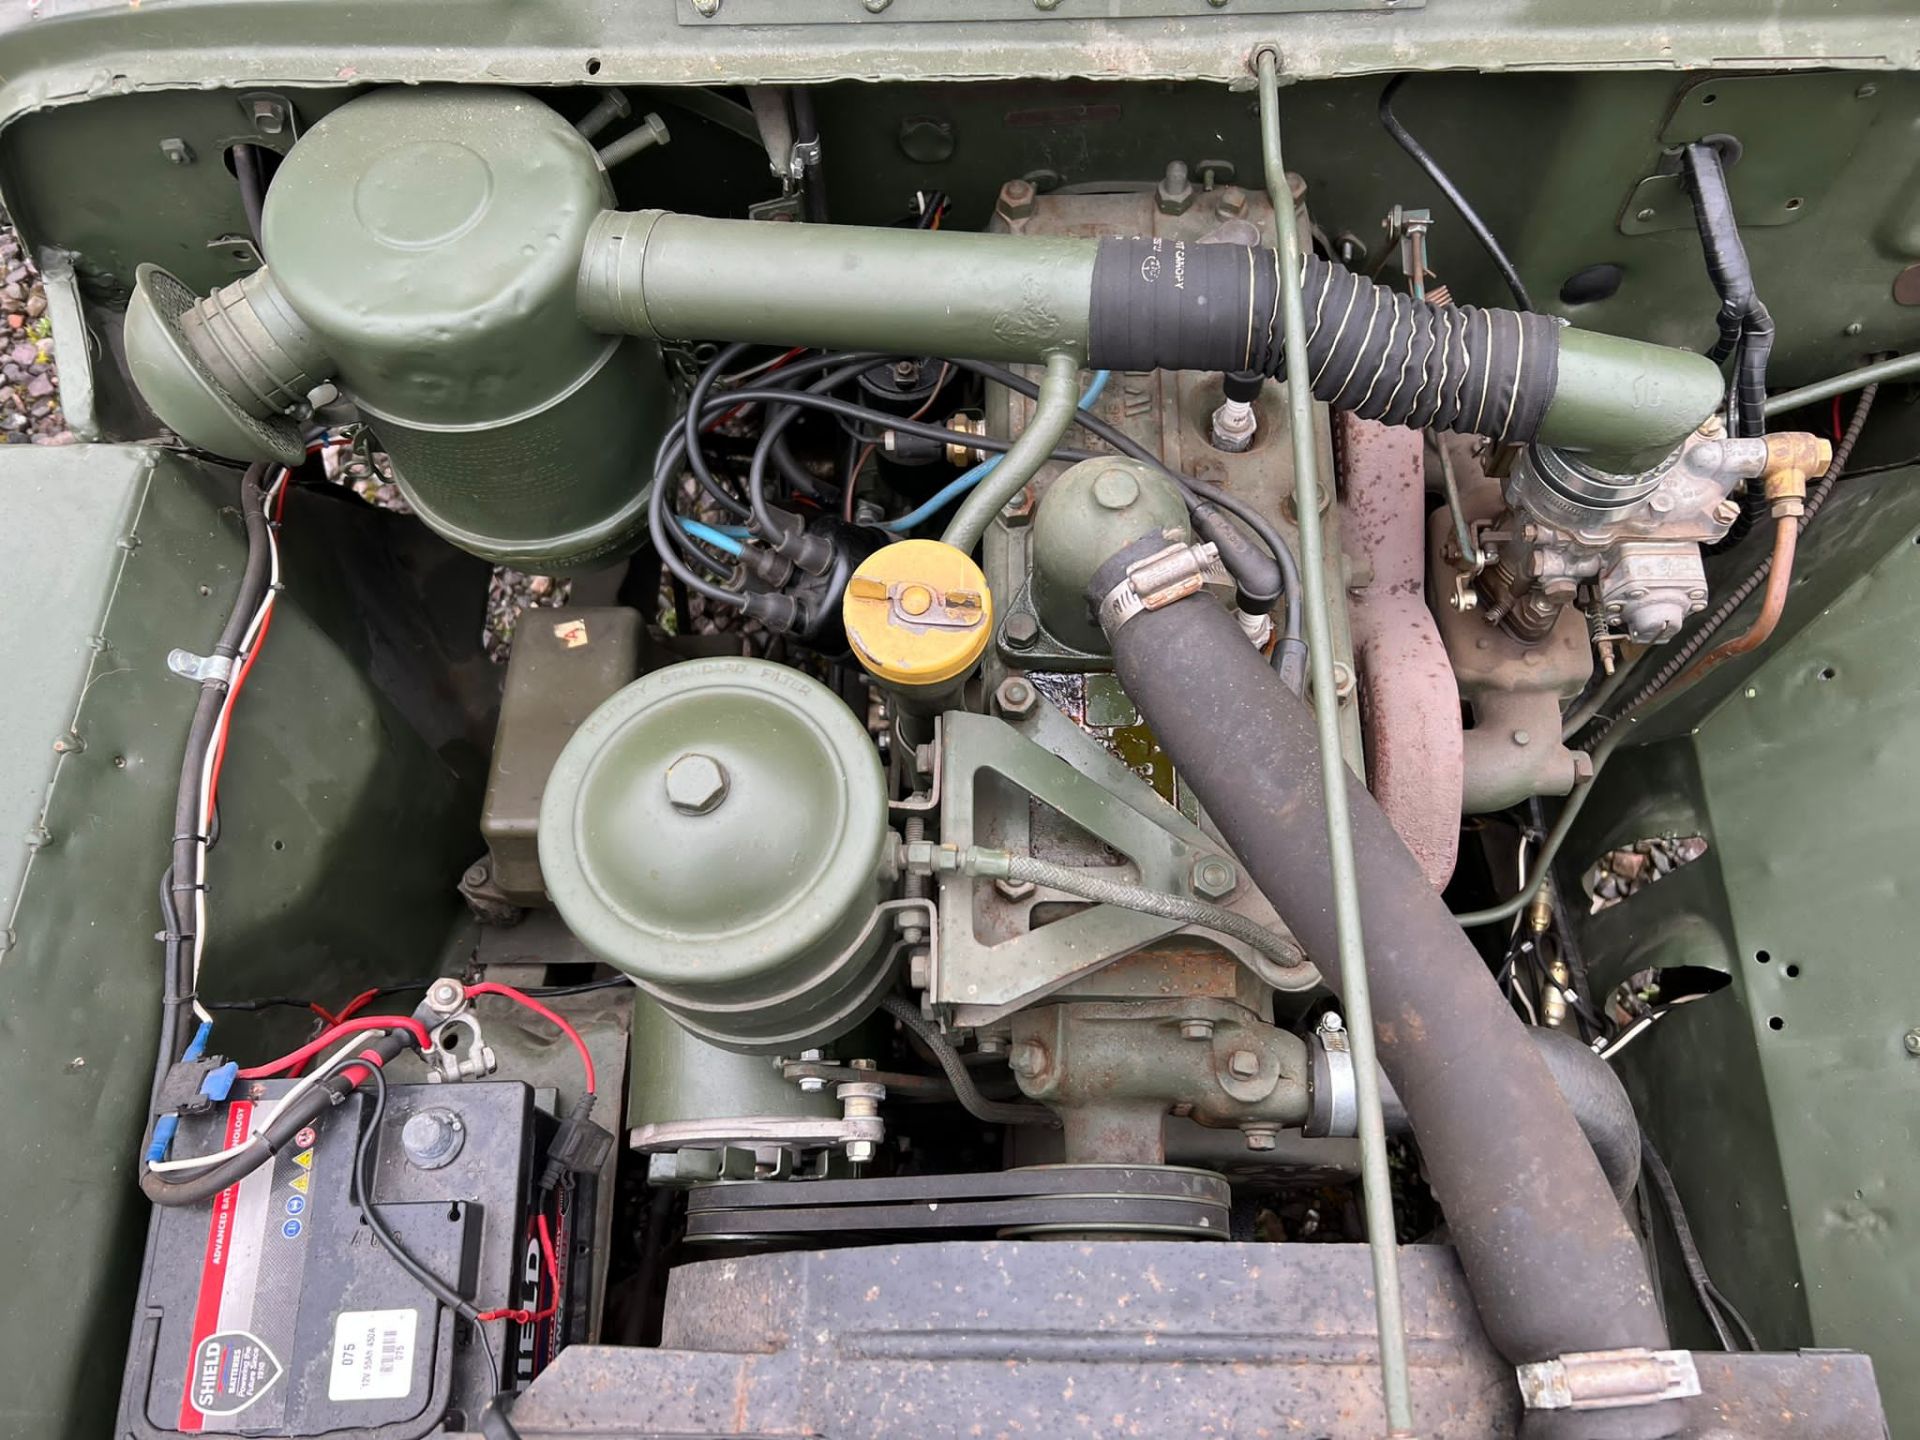 Willys Jeep Model M38 1945 - Image 13 of 13